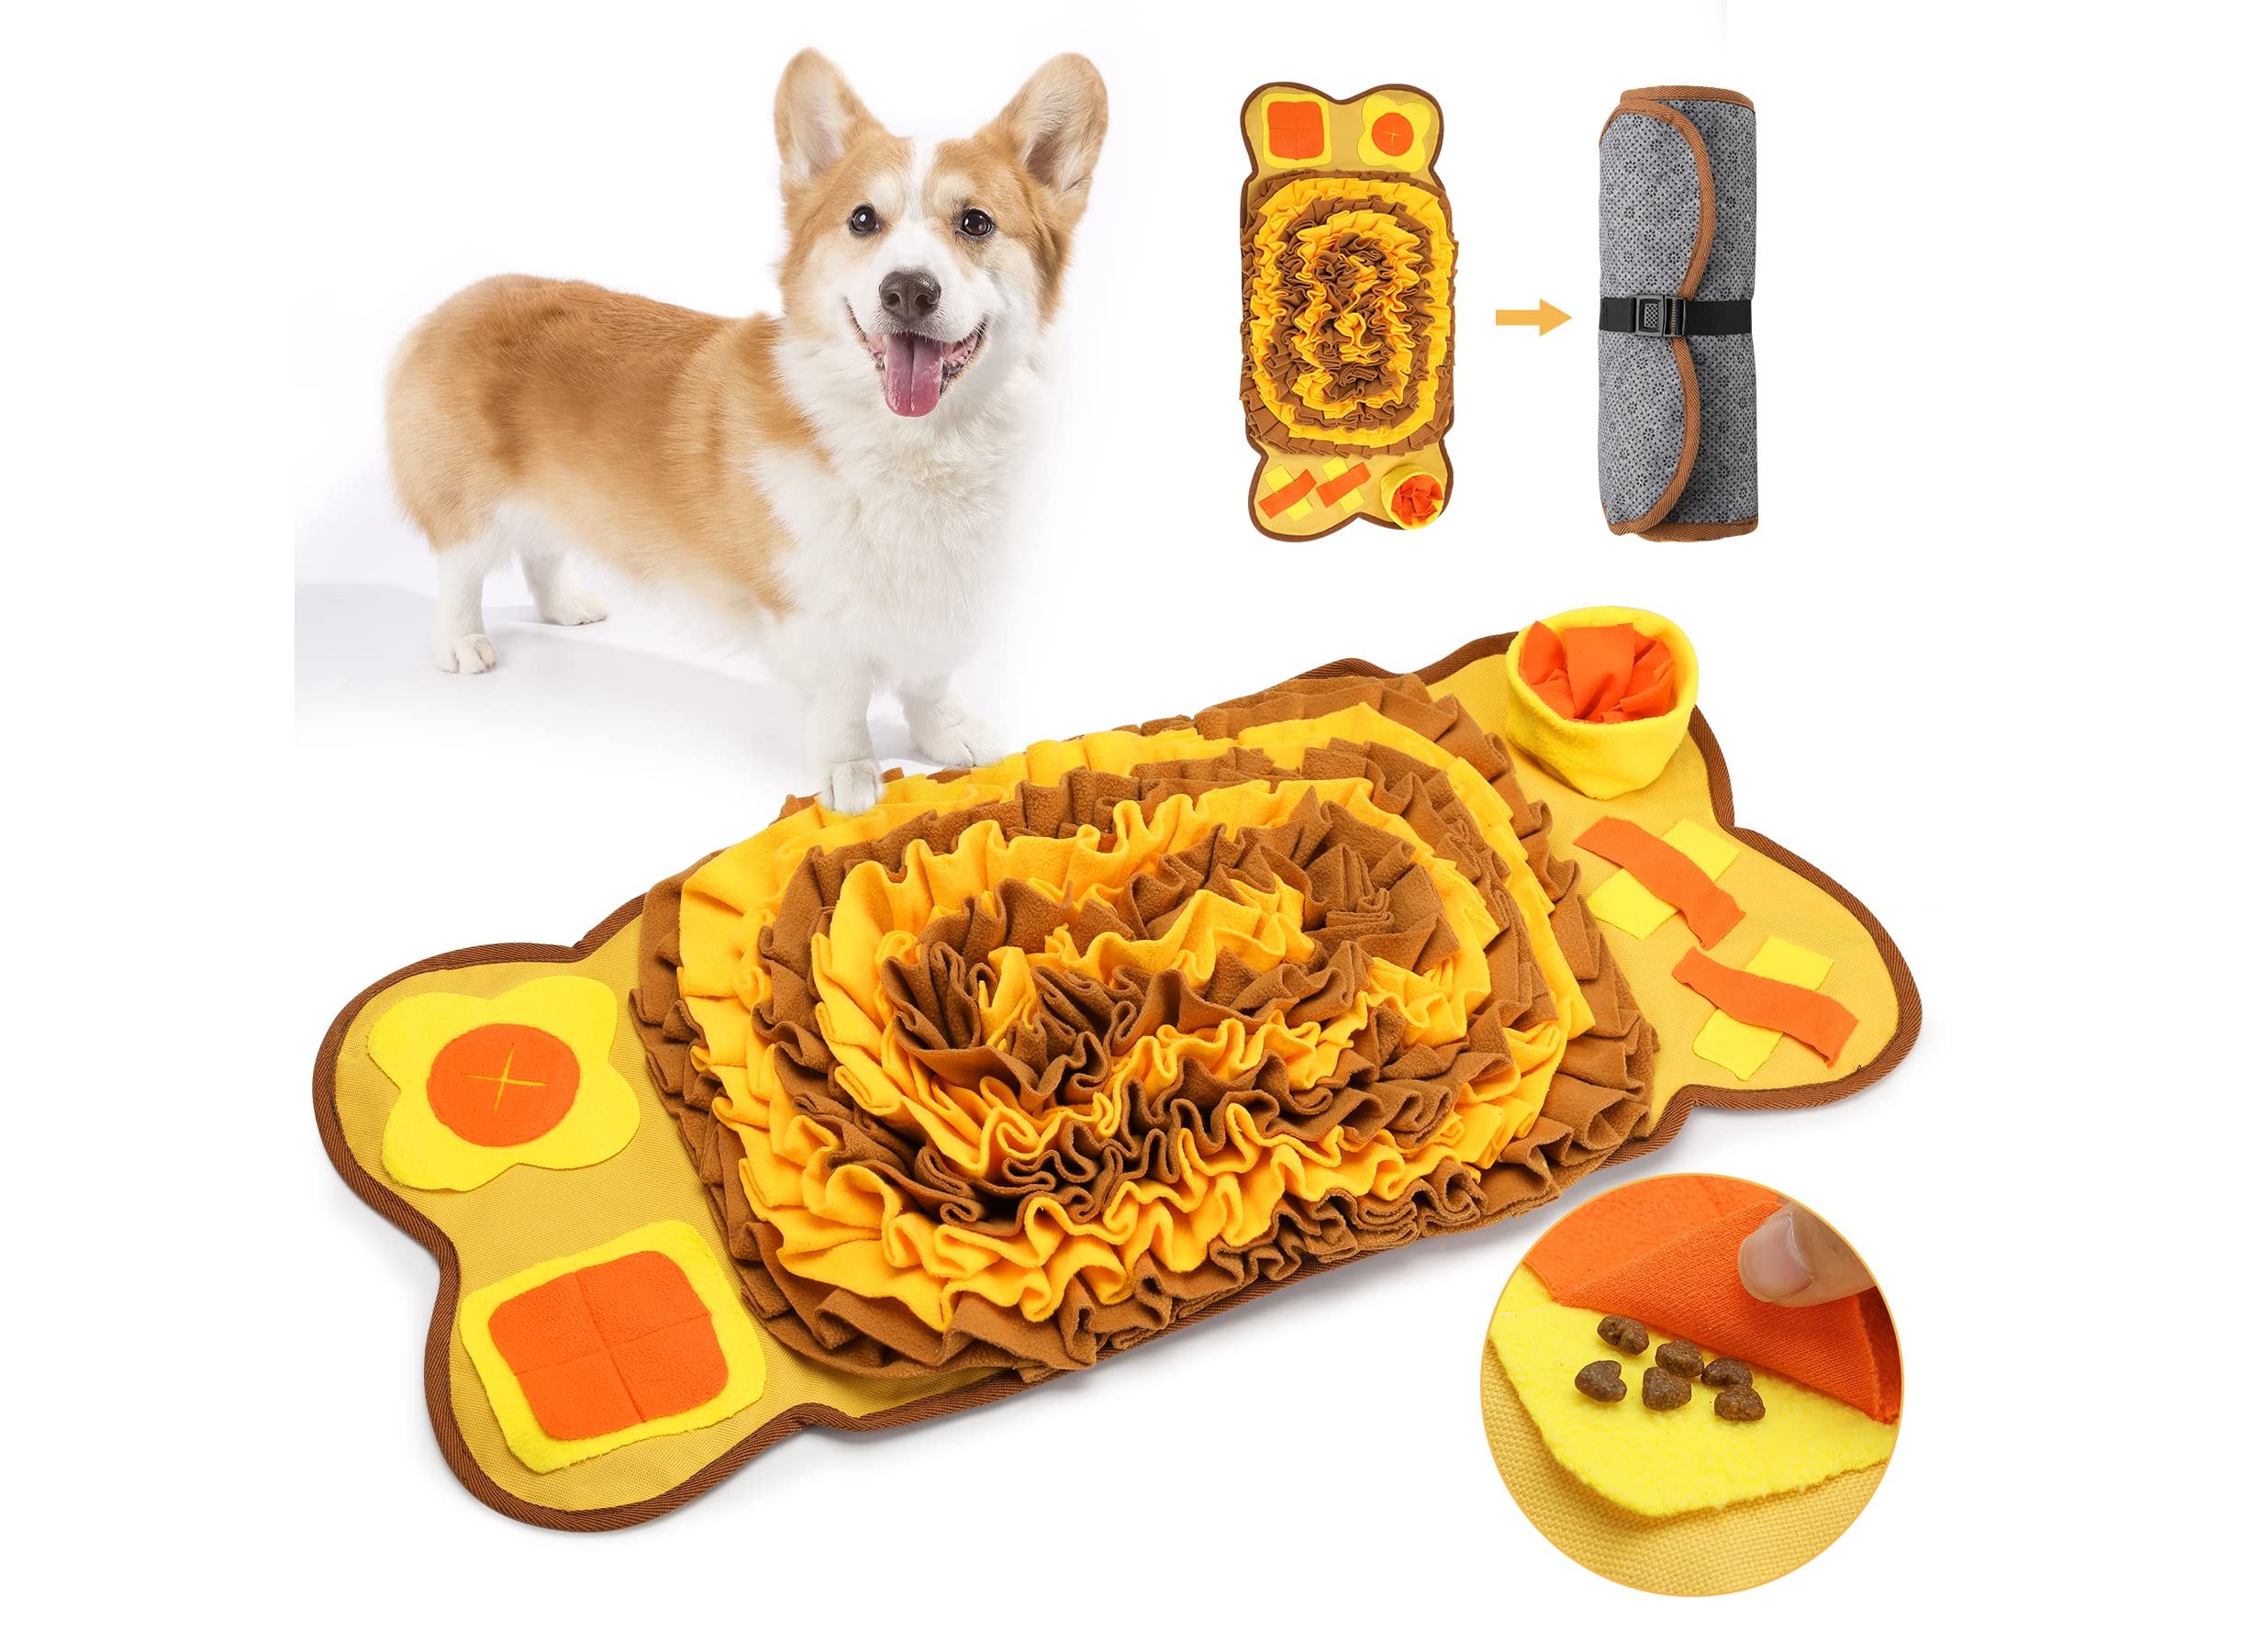 https://protechshop.co.uk/images/thumbnails/2442/1800/detailed/100/Pet-Dog-Snuffle-Mat-Nose-Smell-Training-Sniffing-Pad-Dog-Puzzle-Toy-Slow-Feeding-Bowl-Food_gvbx-vj.jpg